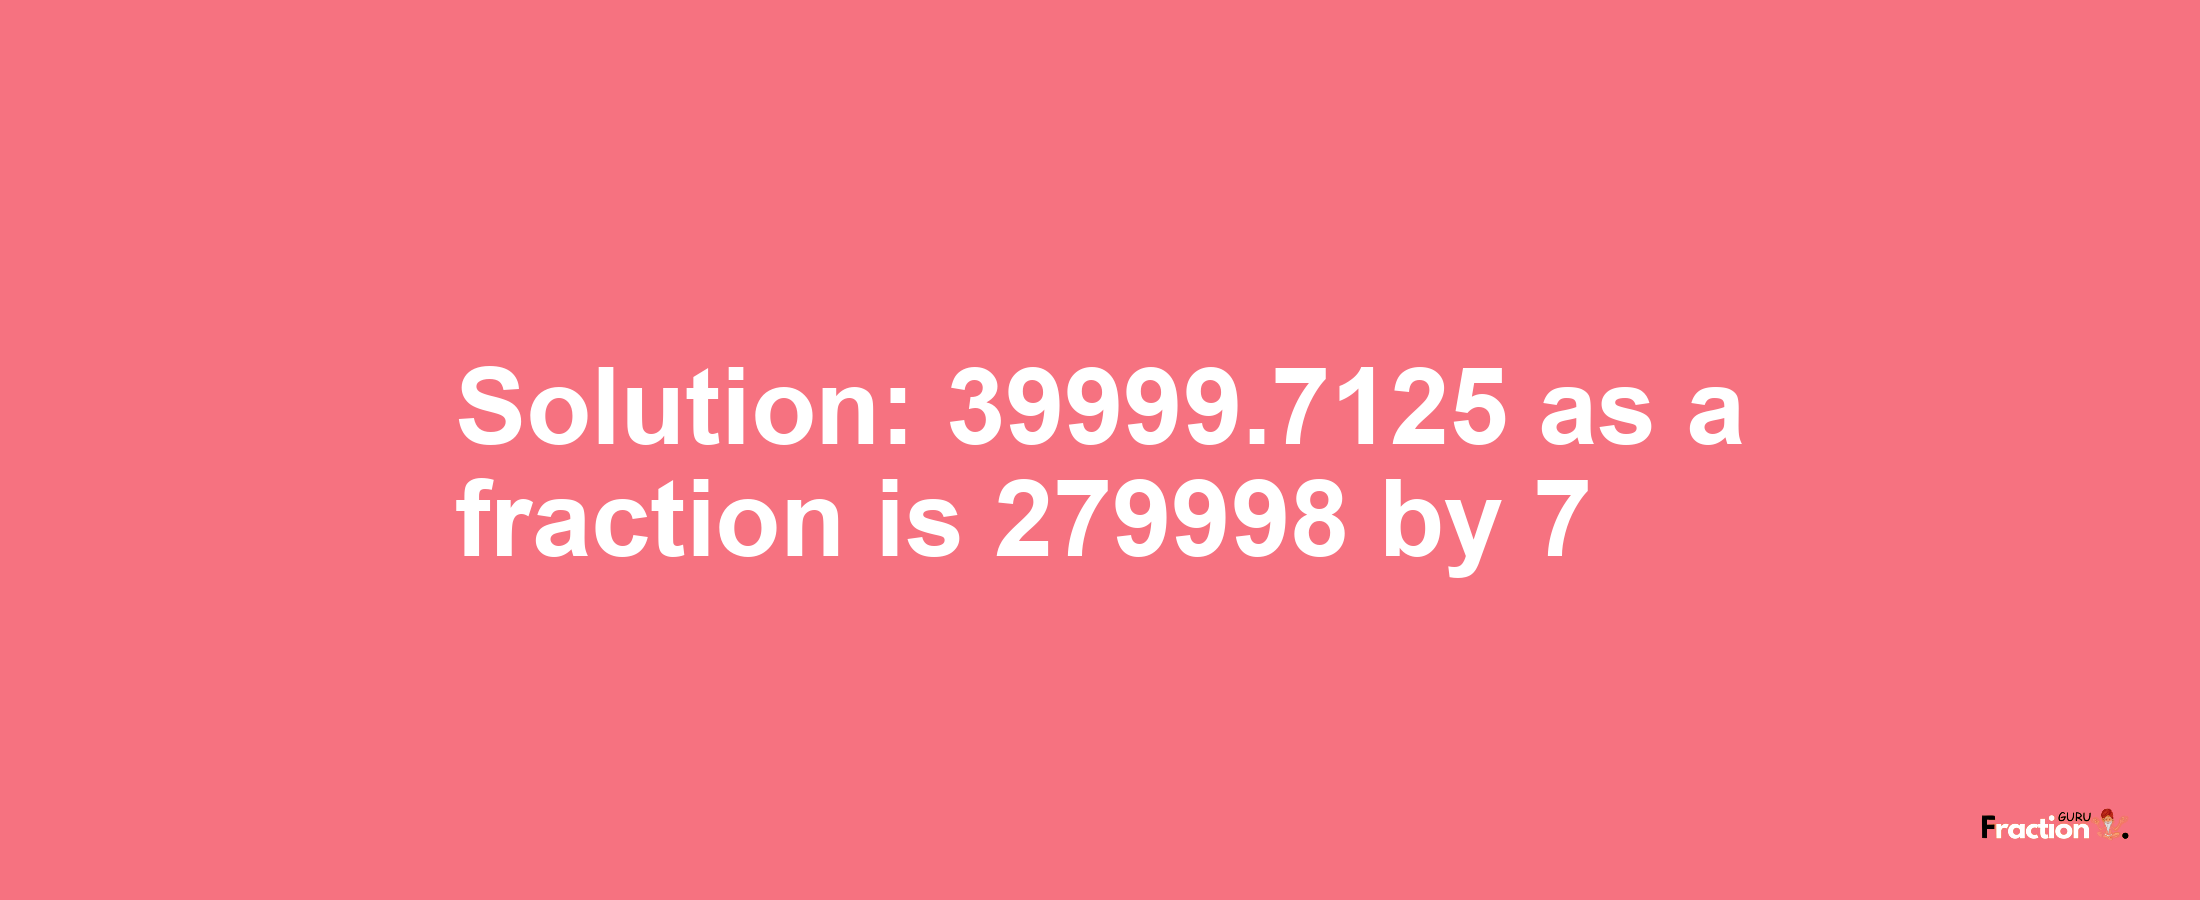 Solution:39999.7125 as a fraction is 279998/7